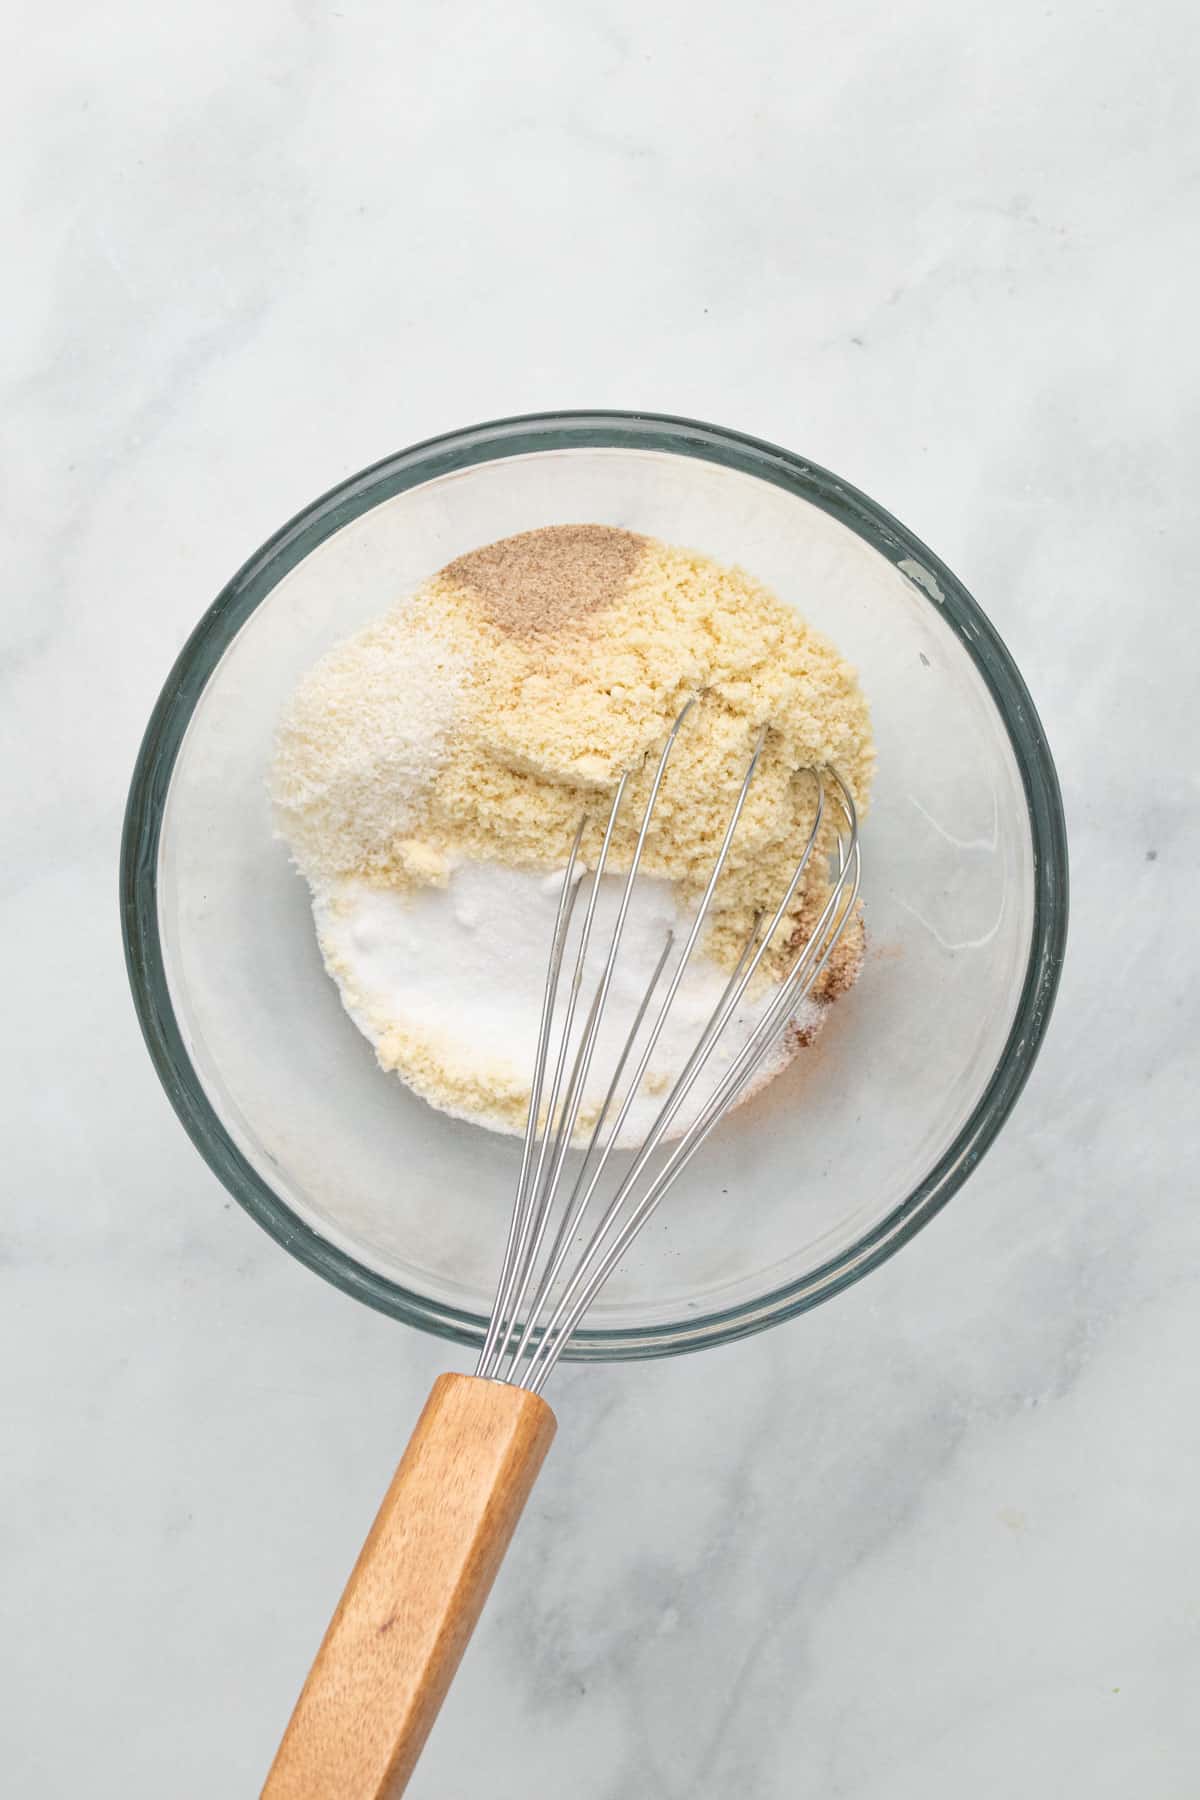 Dry ingredients in a glass mixing bowl with a whisk